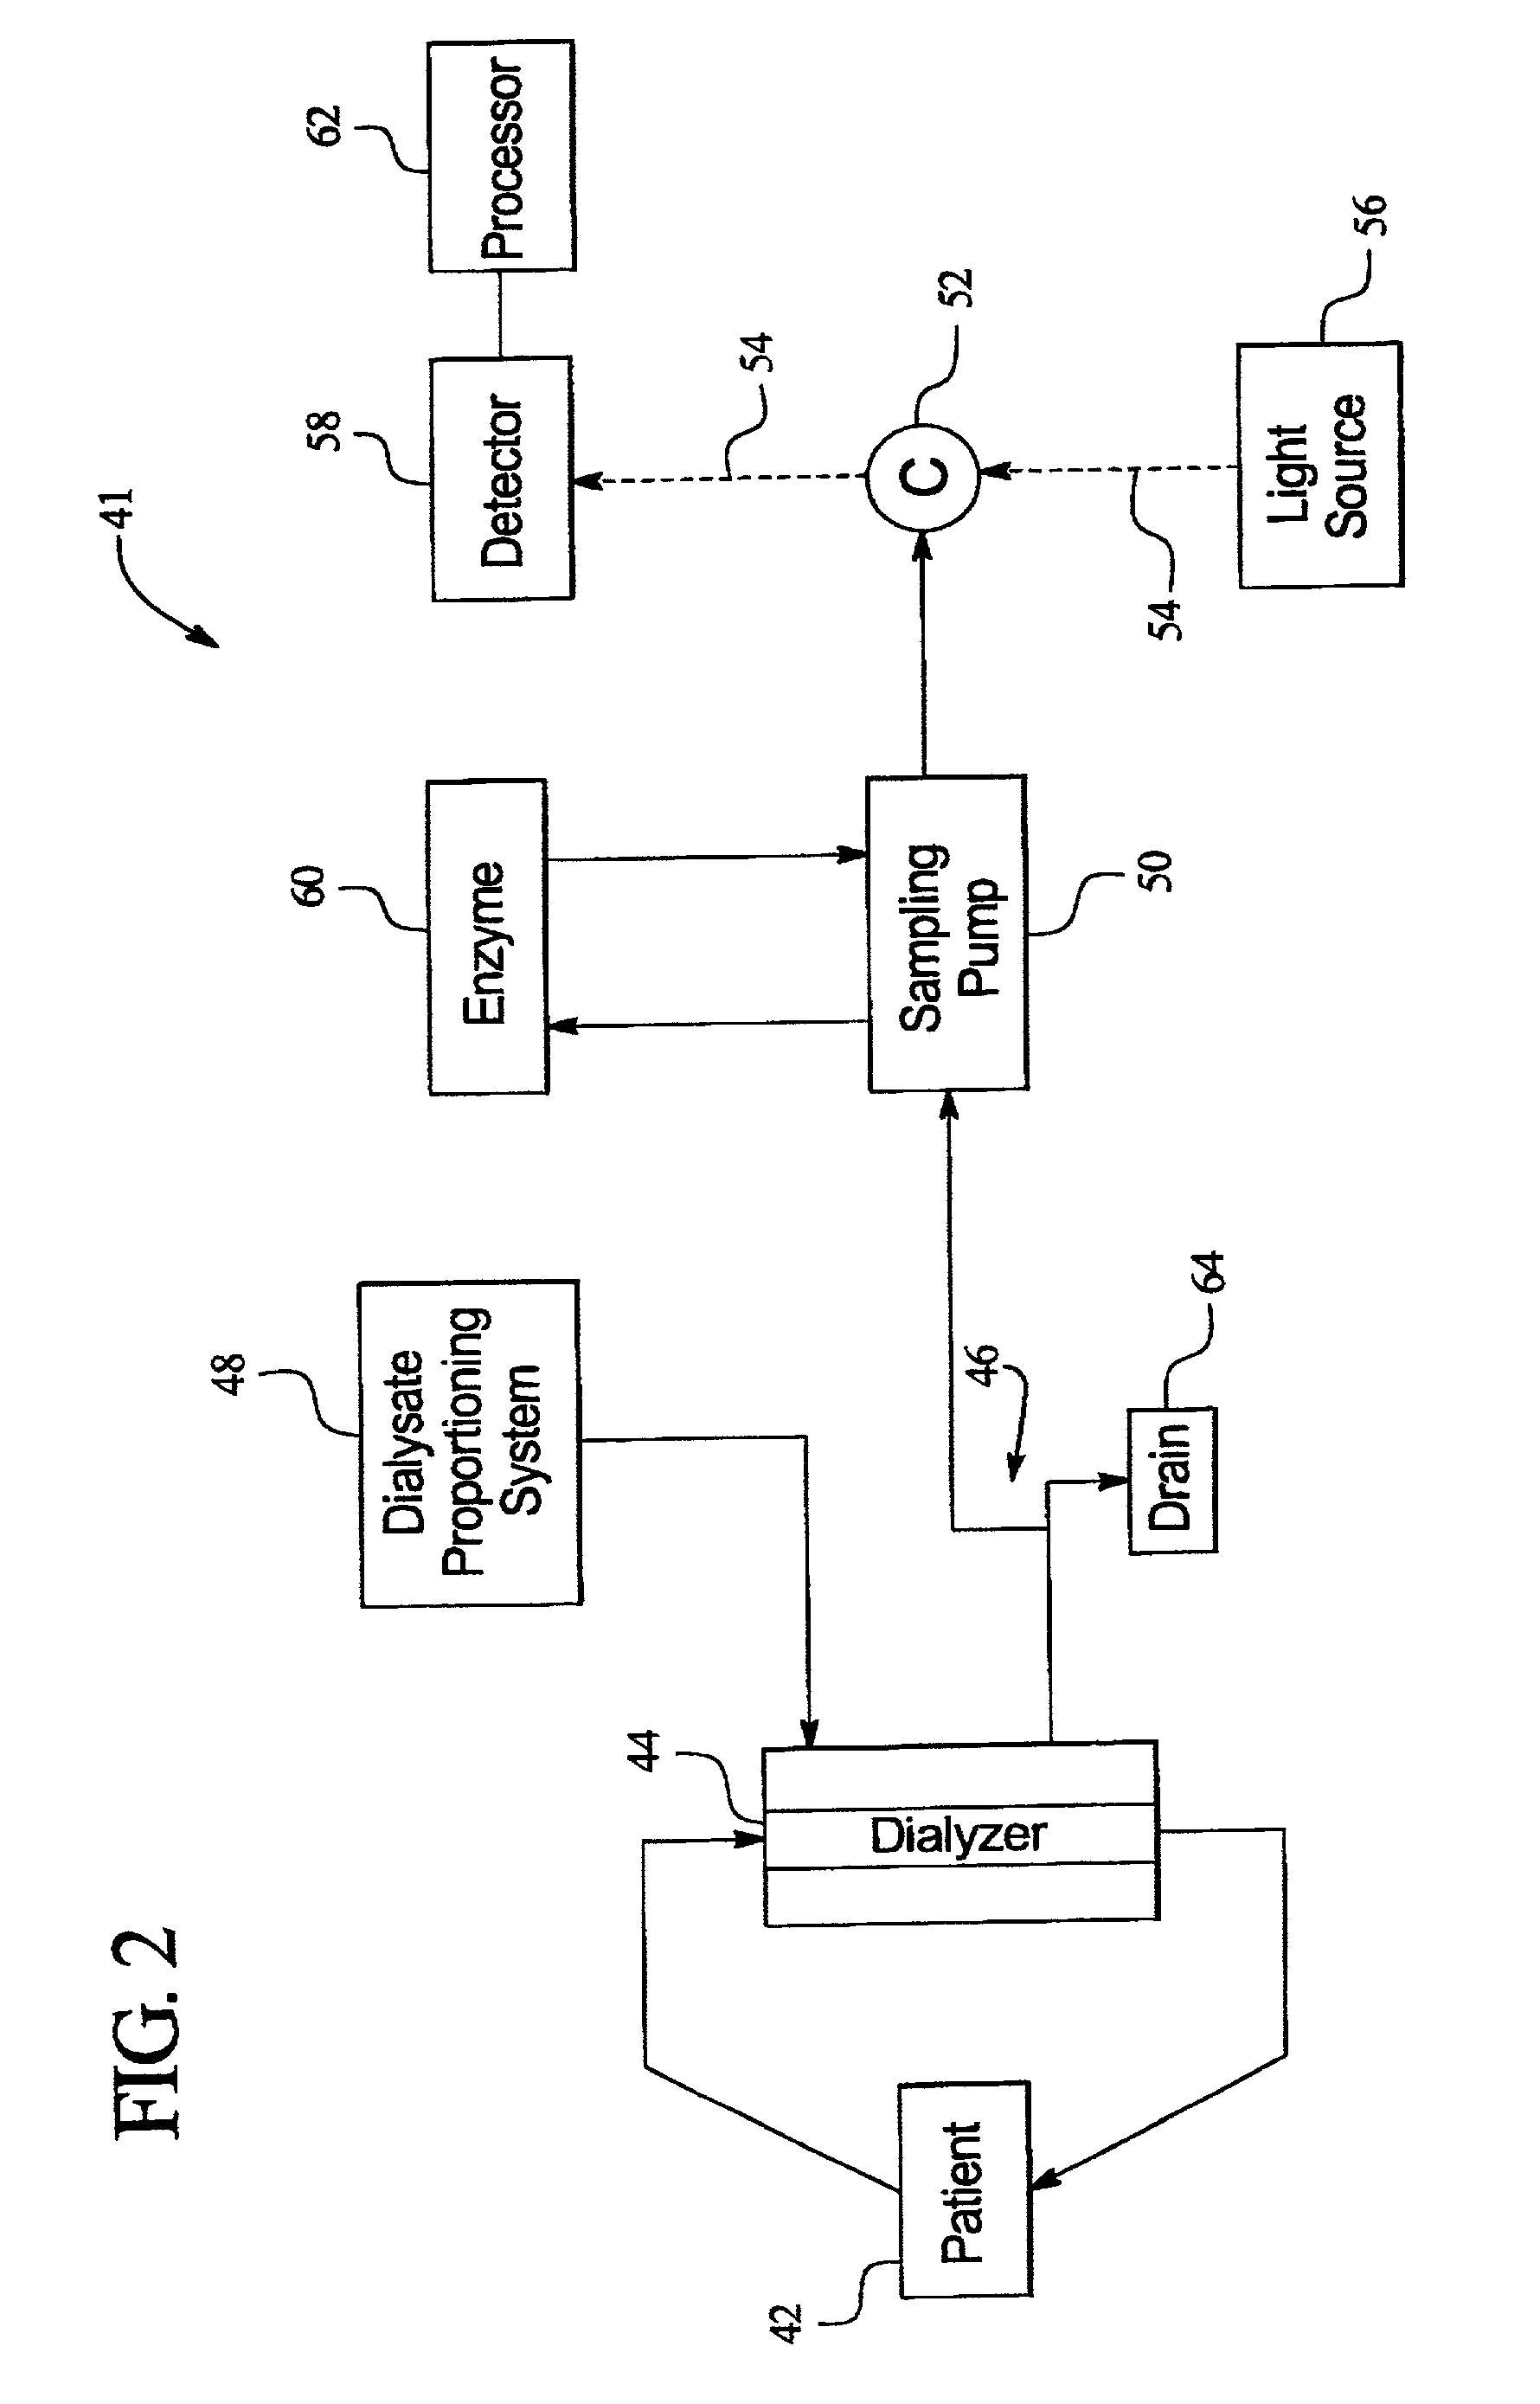 Optical sensor and method for measuring concentration of a chemical constituent using its intrinsic optical absorbance